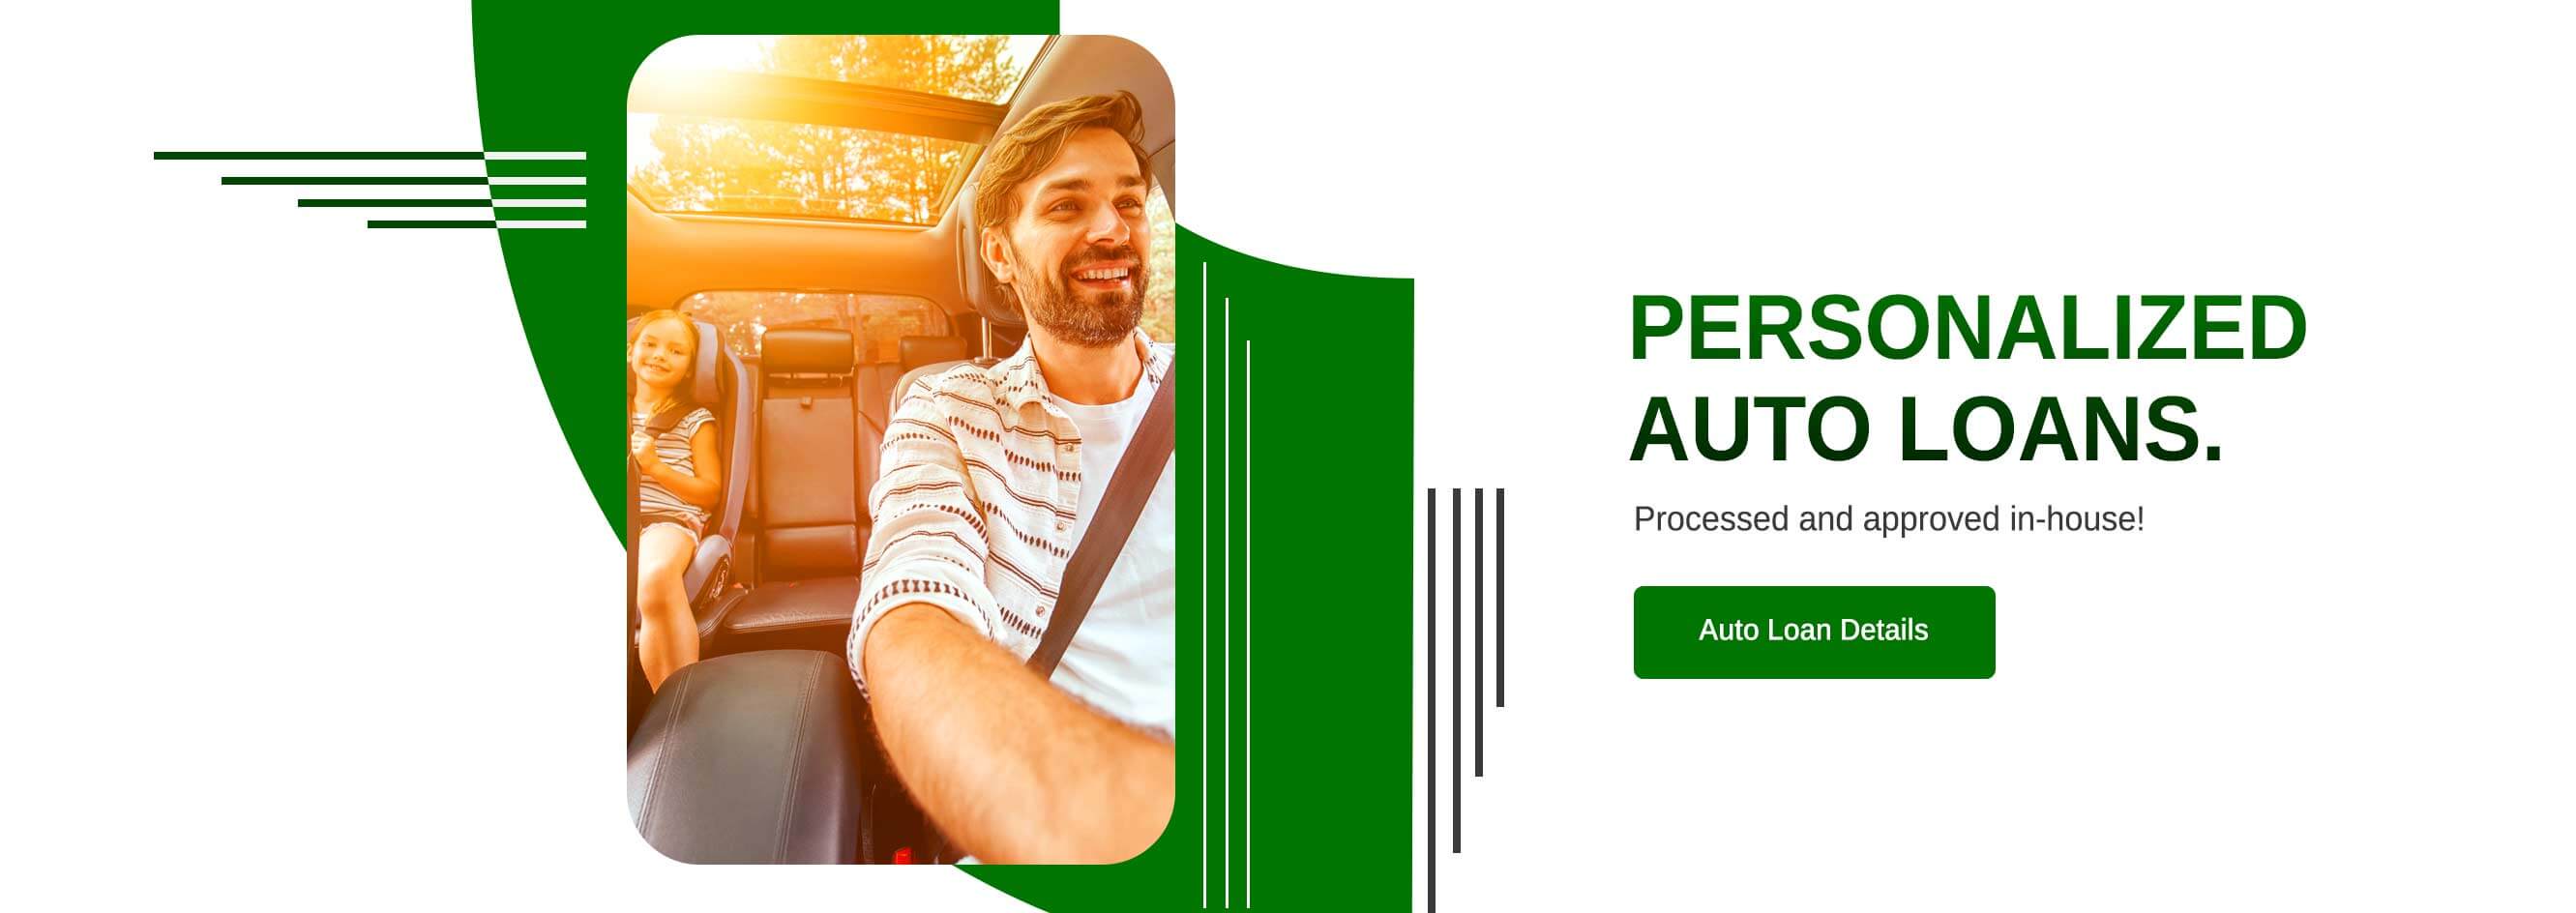 Personalized  Auto Loans. Processed and approved in-house! Auto Loan Details